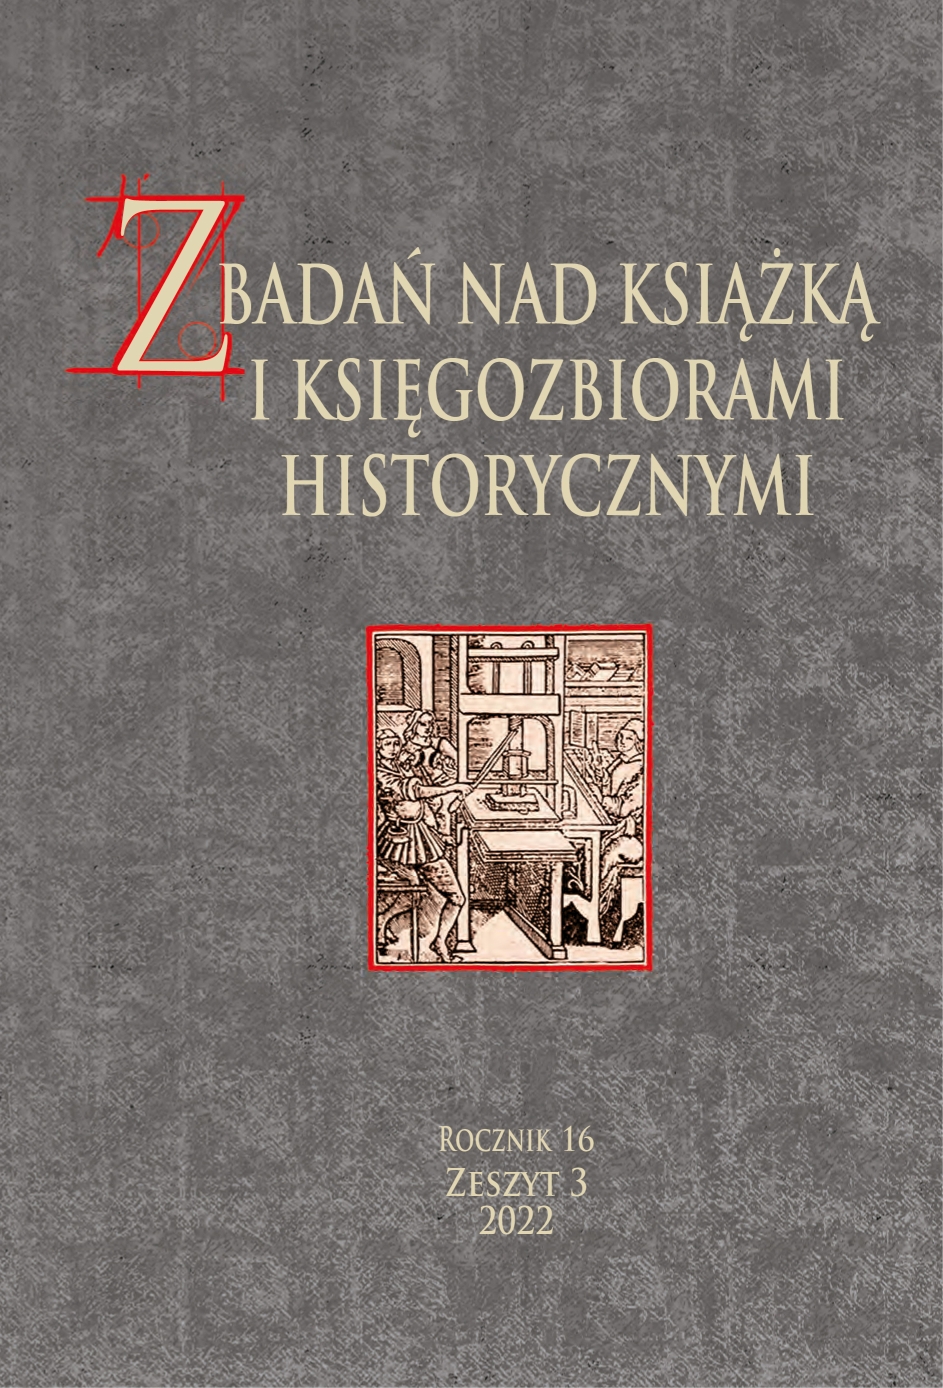 Protestant writings in the Basilian book collections of the Lviv eparchy in the 18th century Cover Image